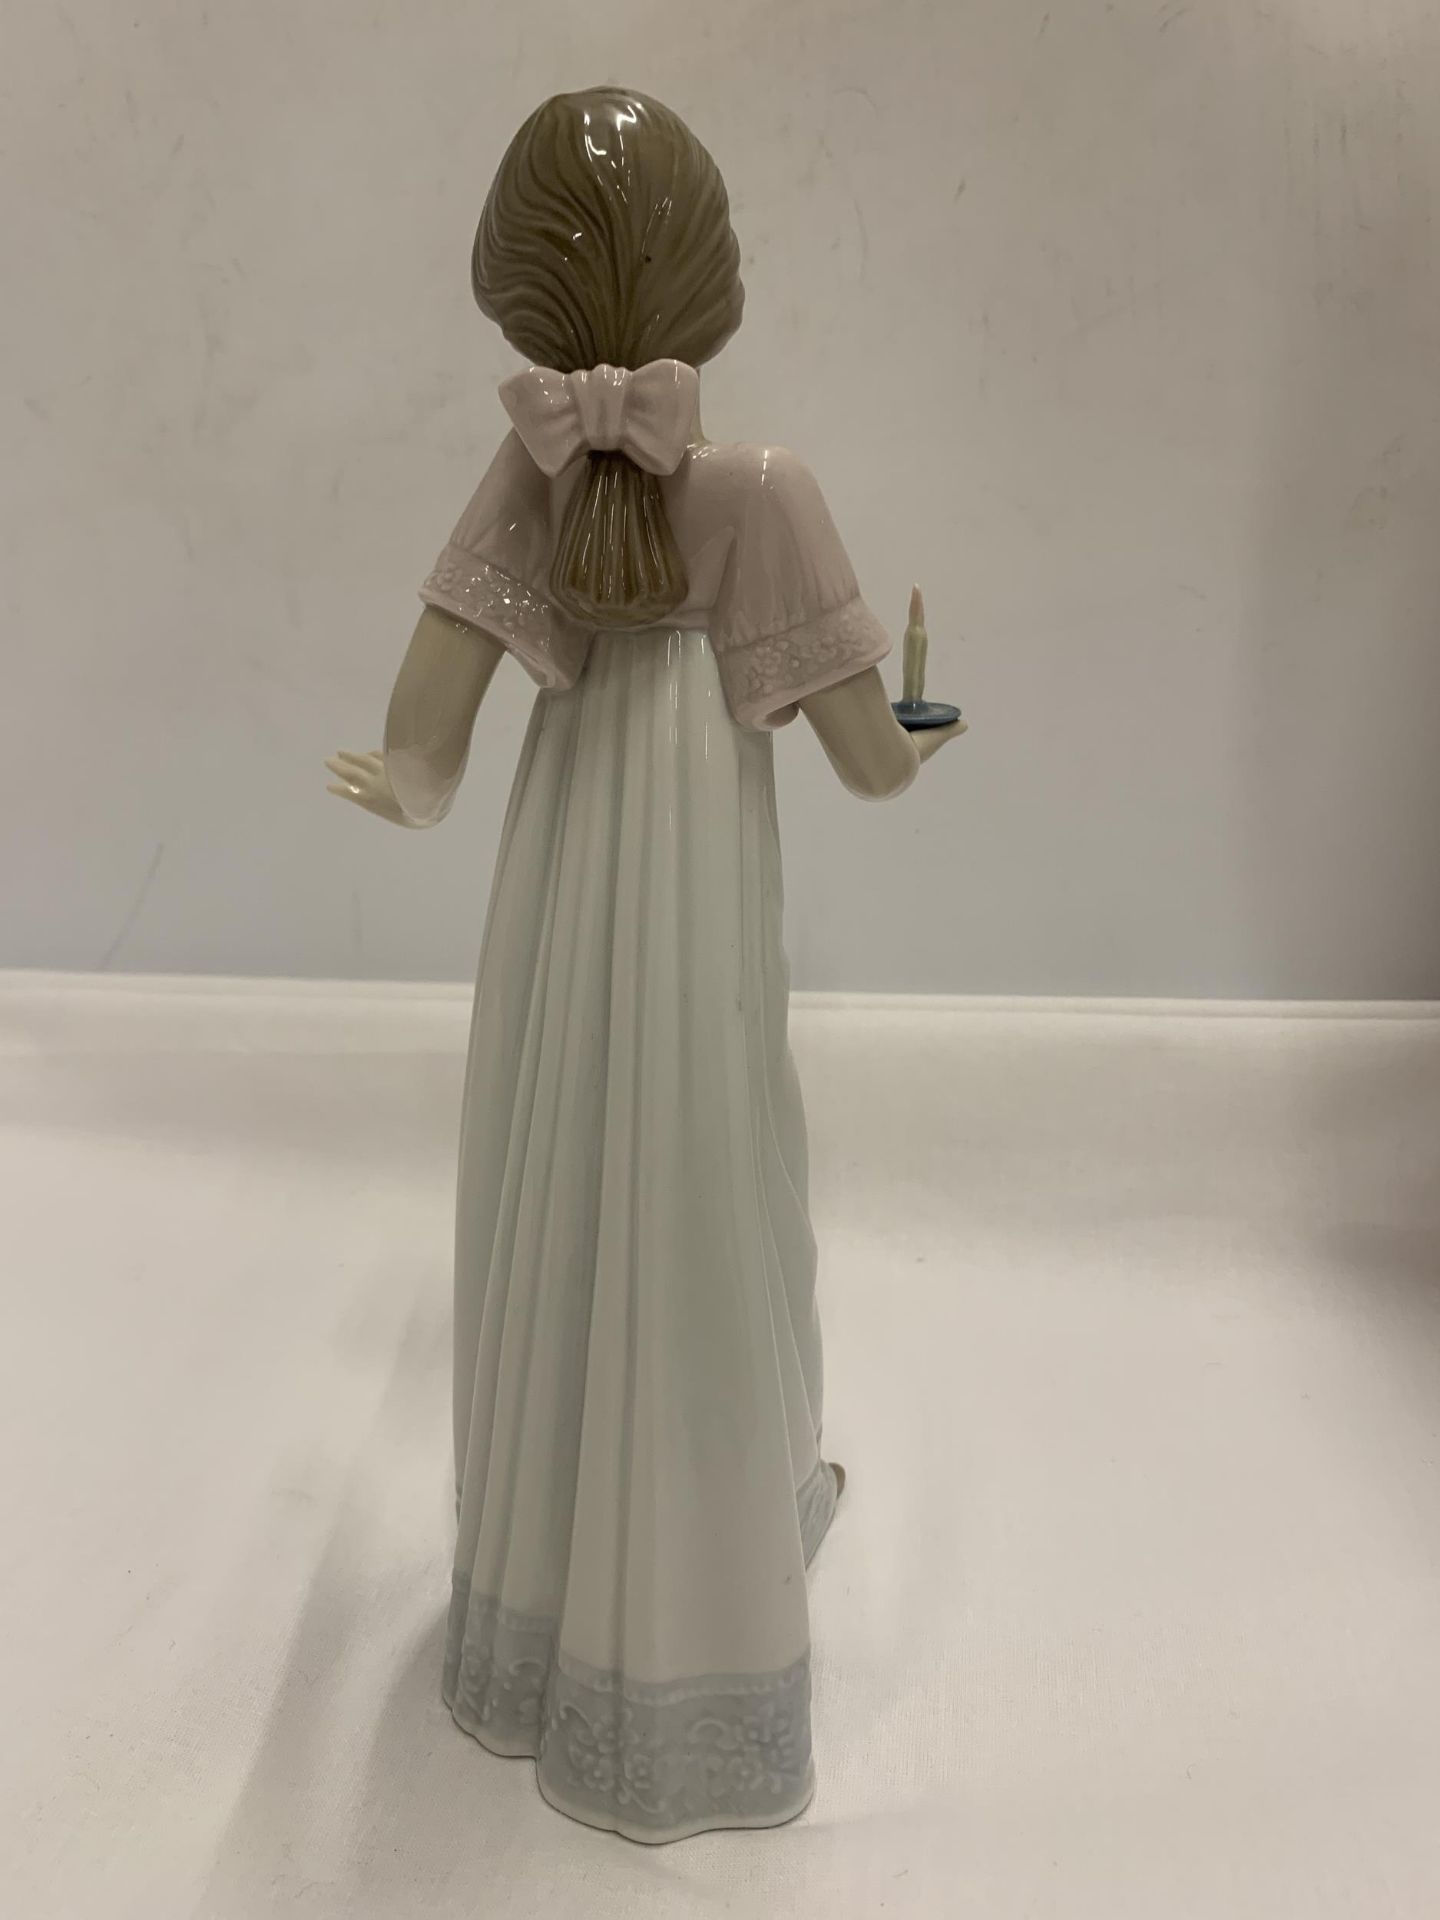 A NAO FIGURE OF A GIRL HOLDING A CANDLE - Image 3 of 5